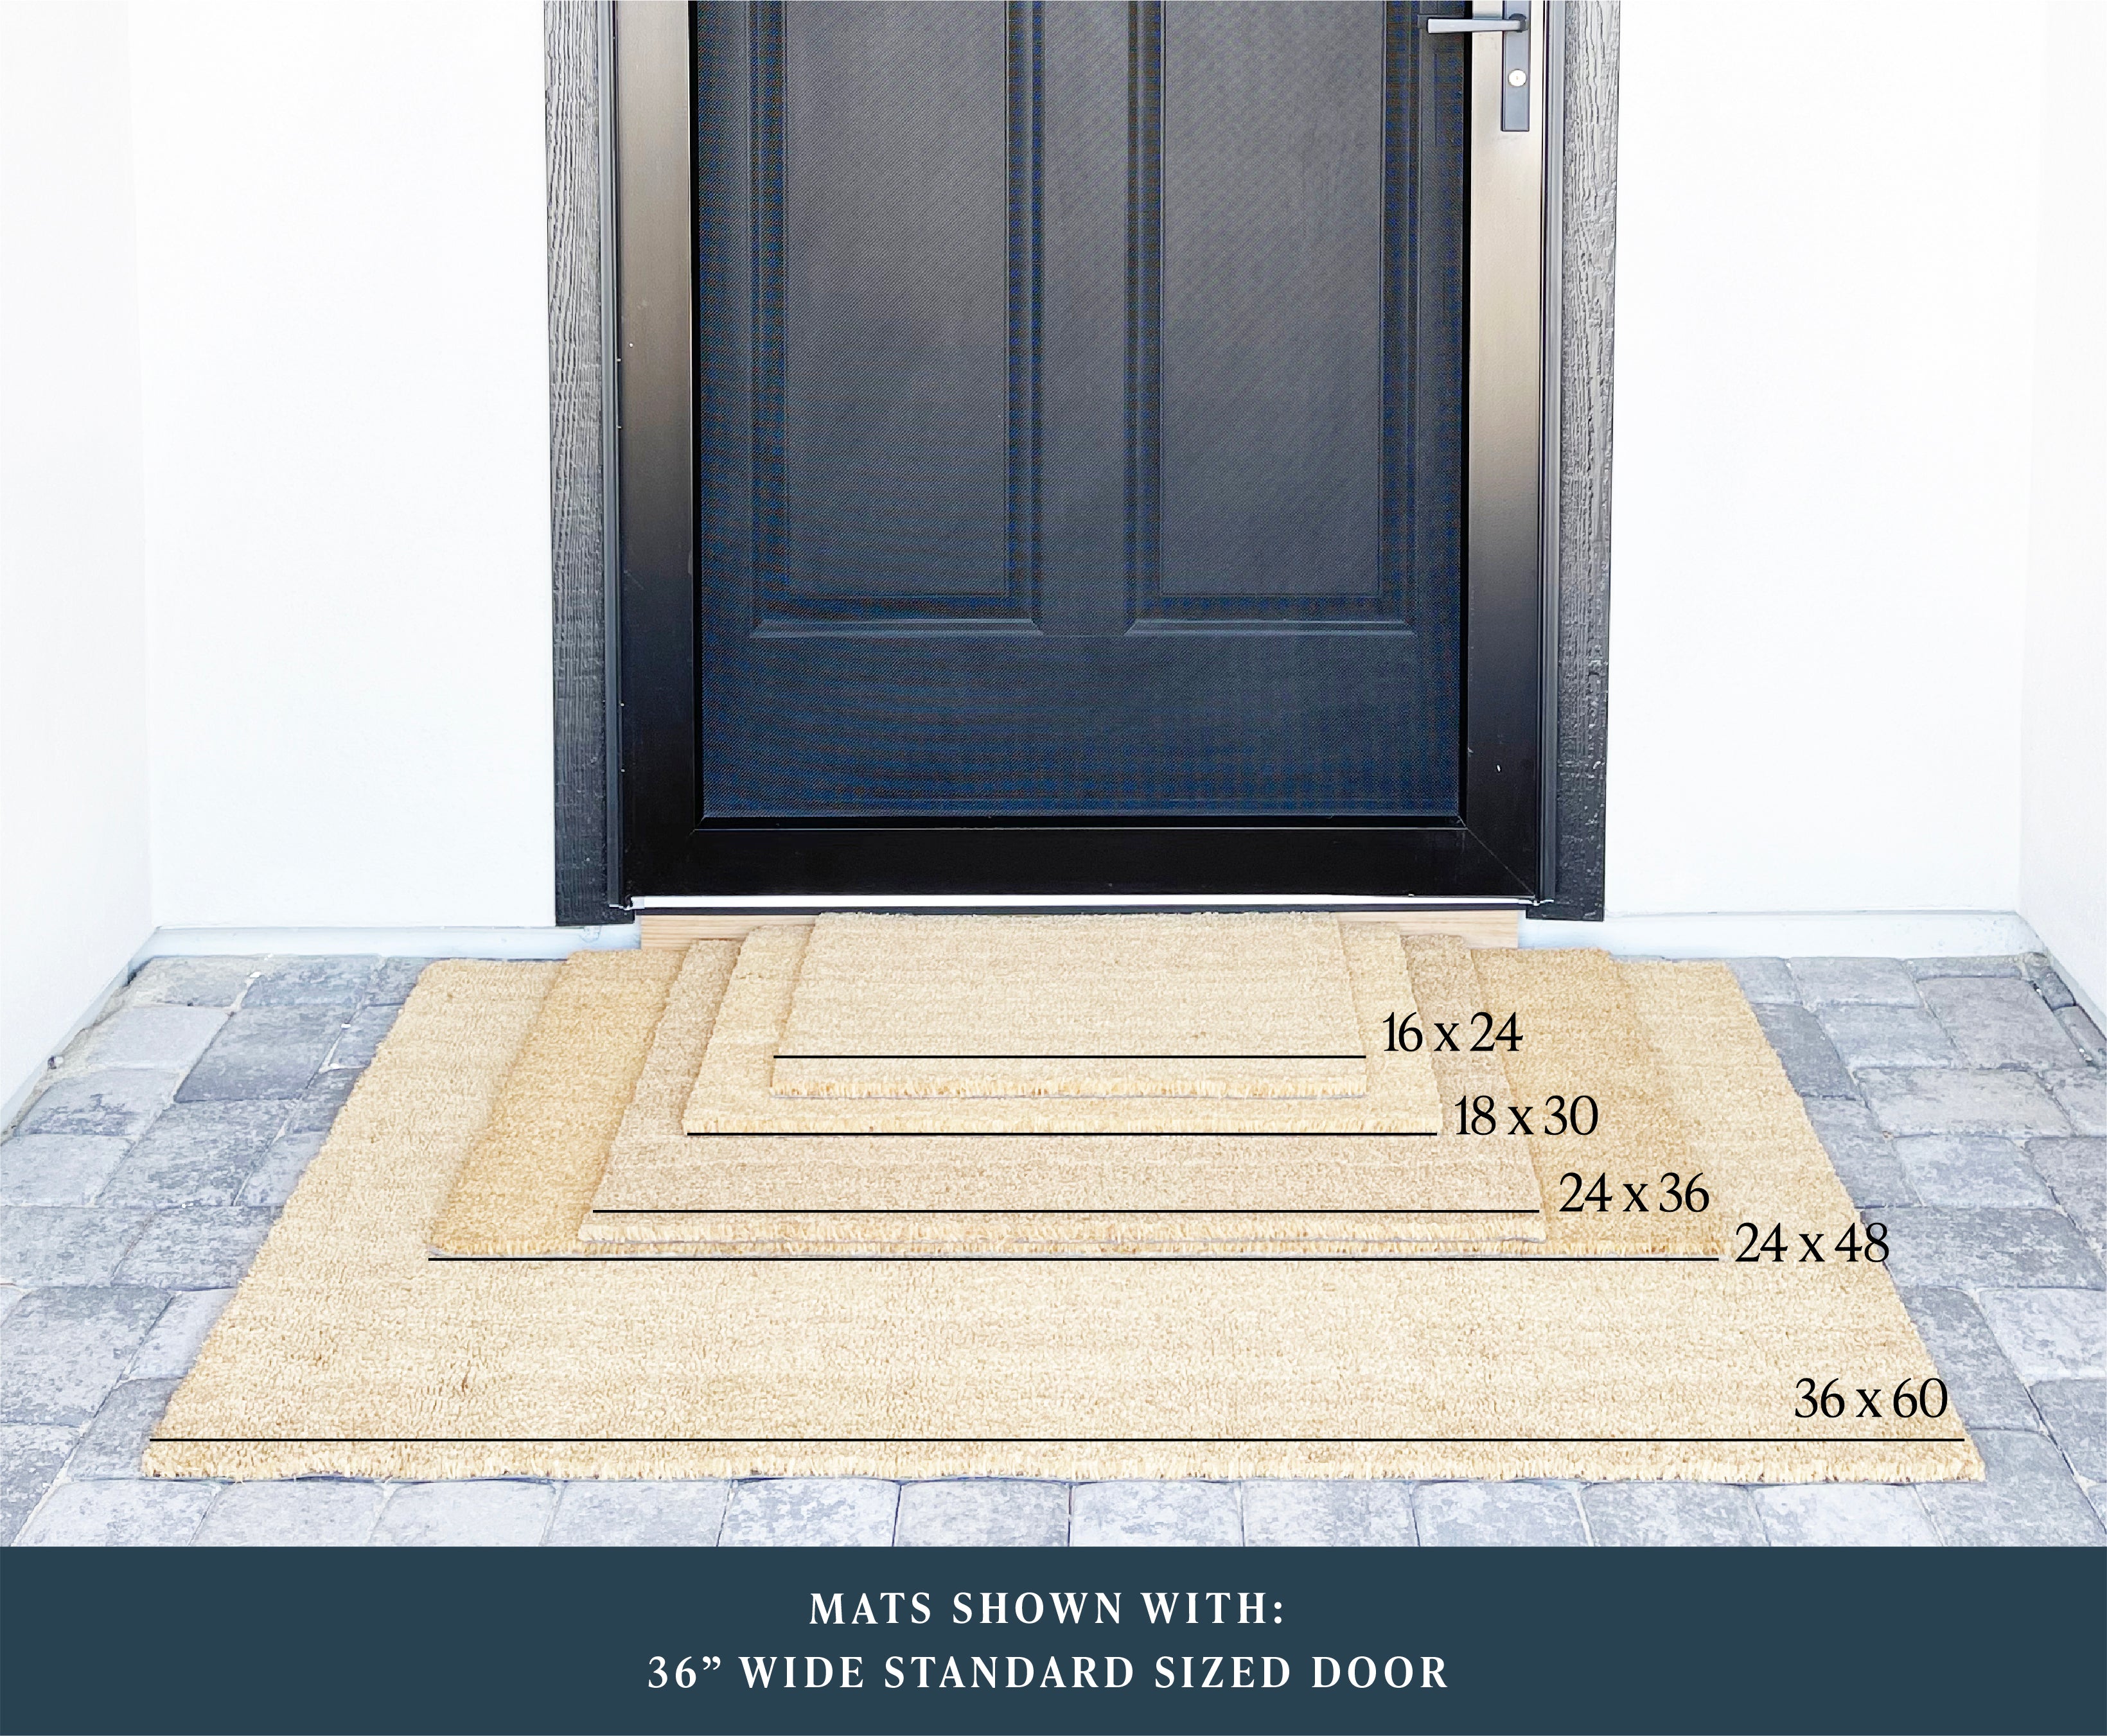 Welcome With Personalized Address or Last Name Doormat